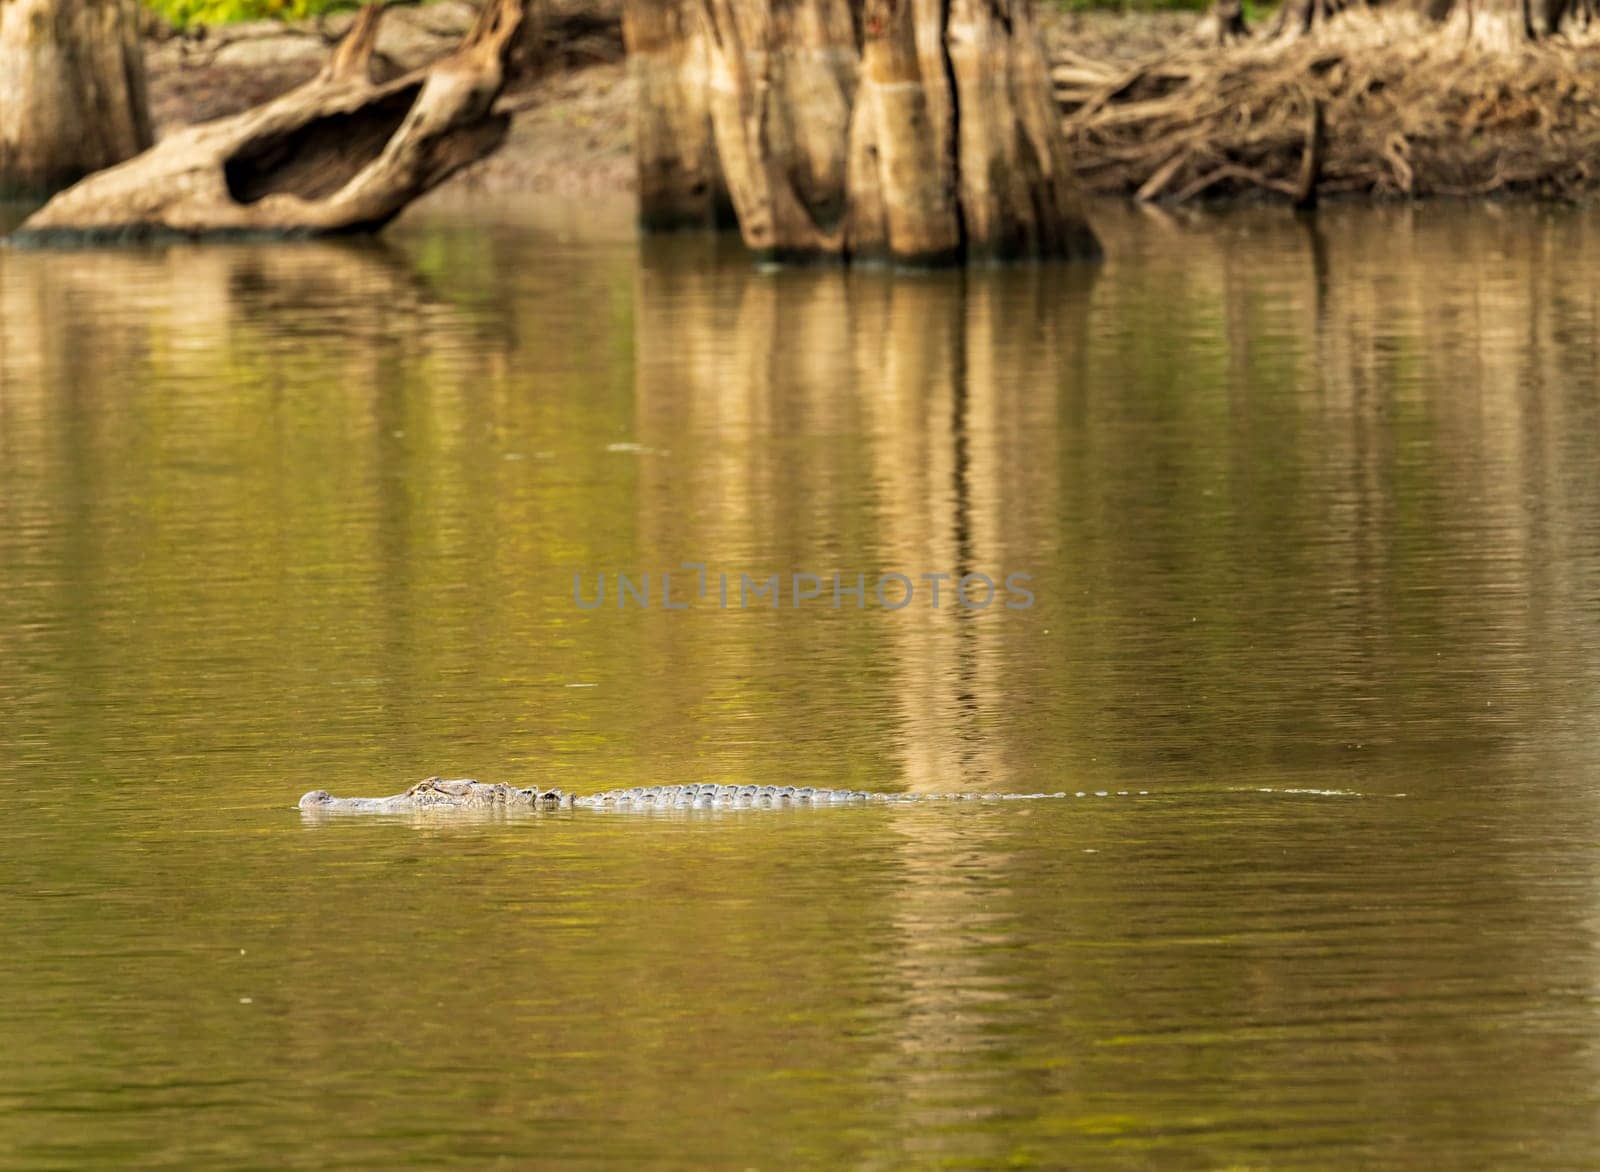 American alligator in profile in calm waters of Atchafalaya basin by steheap